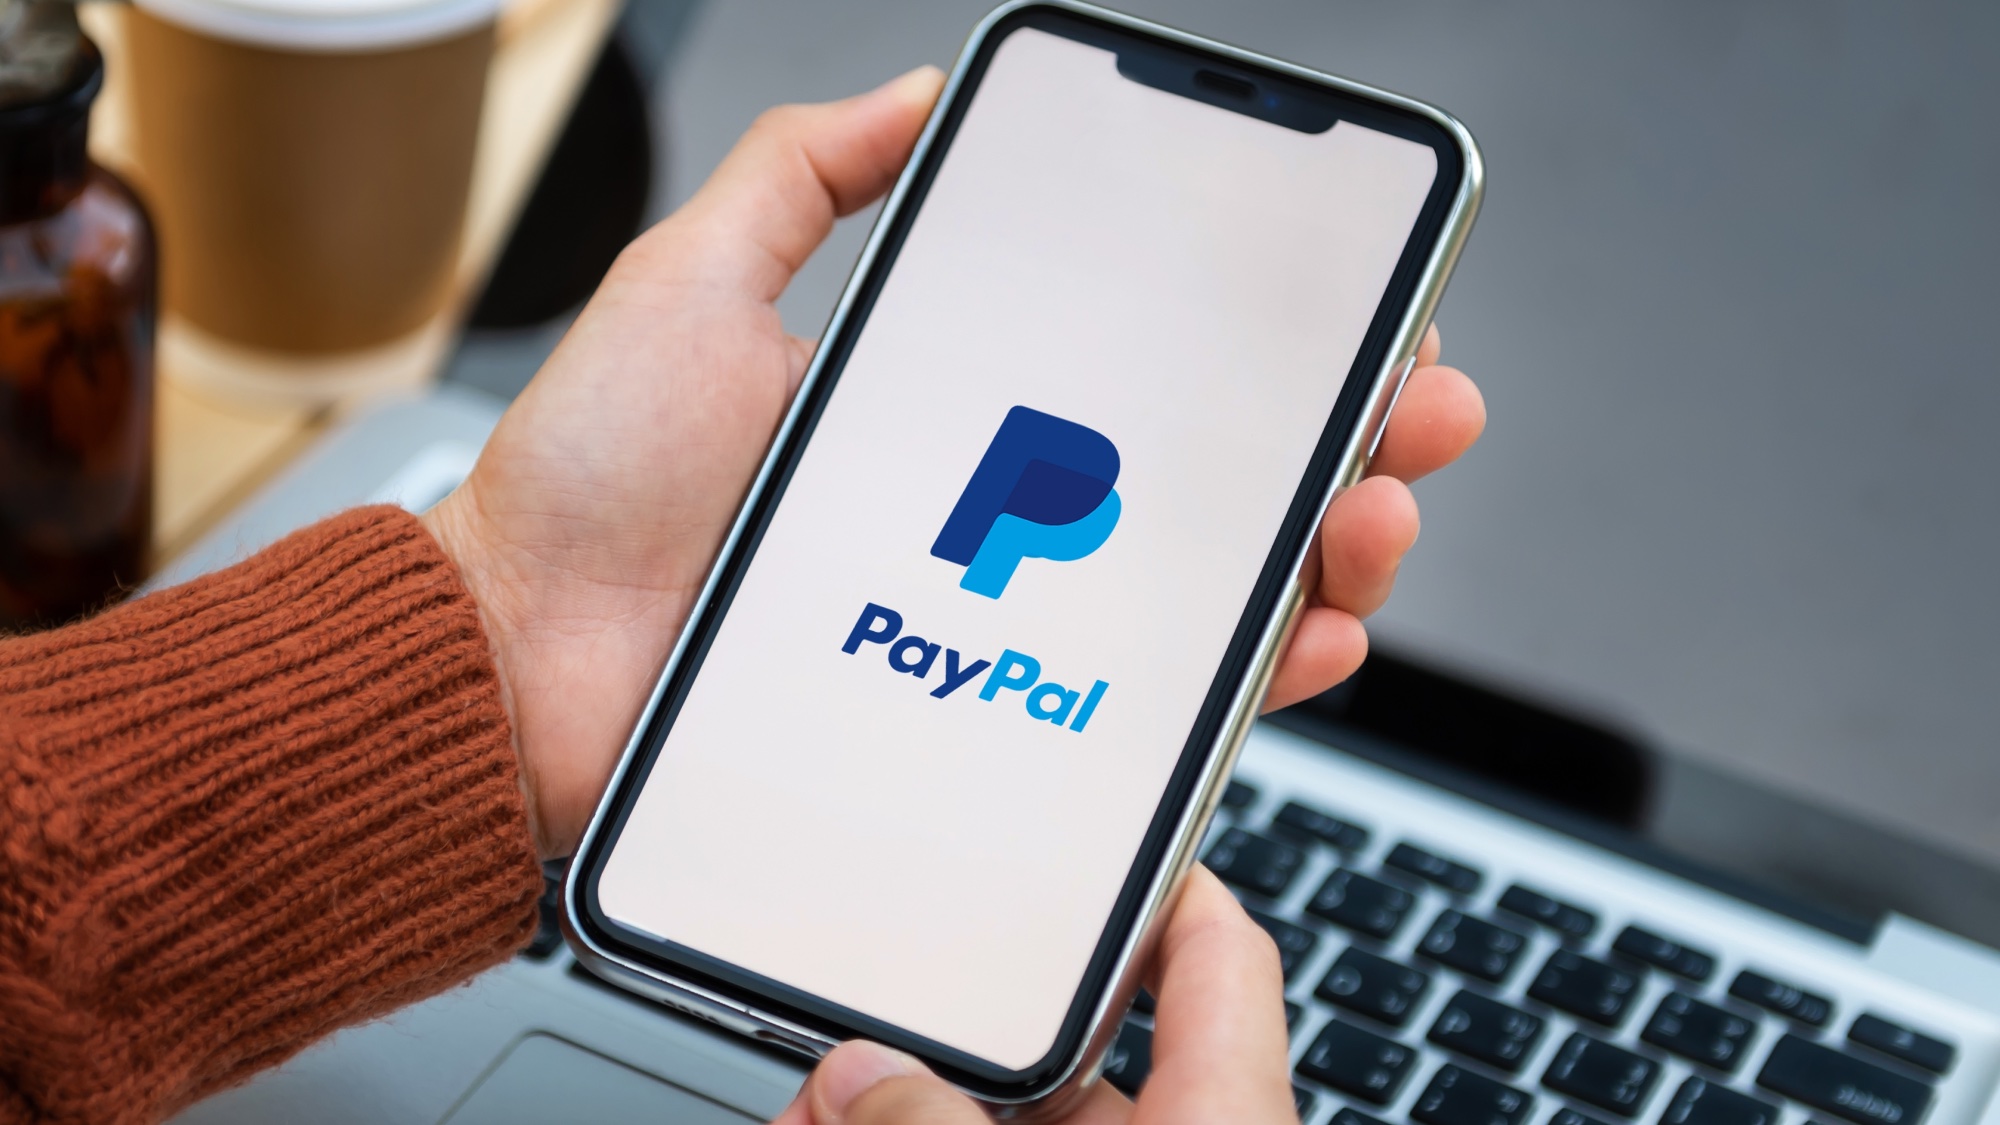 How can I change from goods and services to friend - PayPal Community